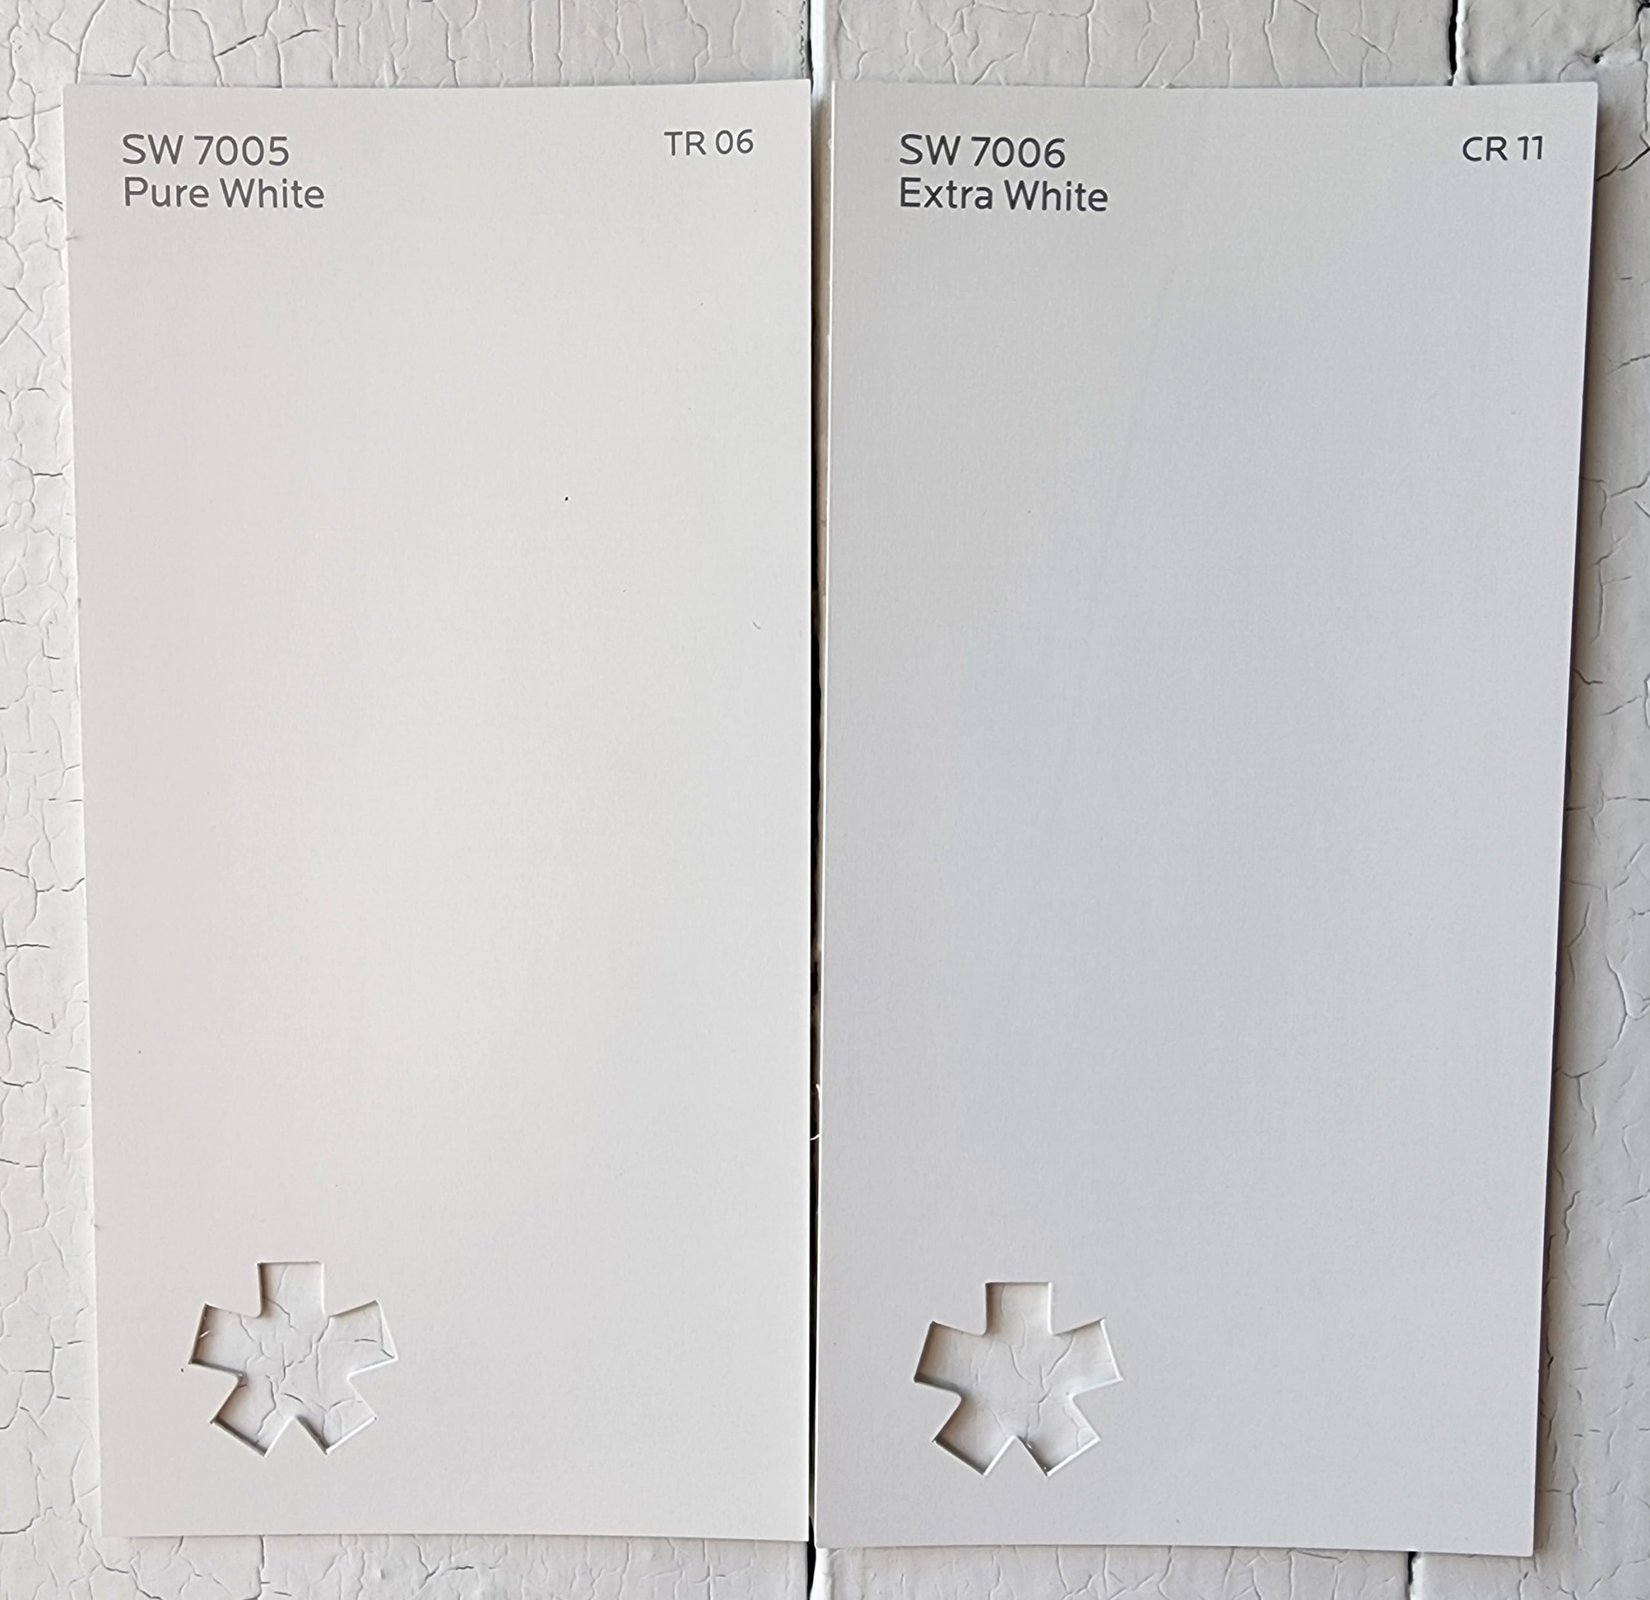  Pure White vs Extra White by Sherwin Williams scaled